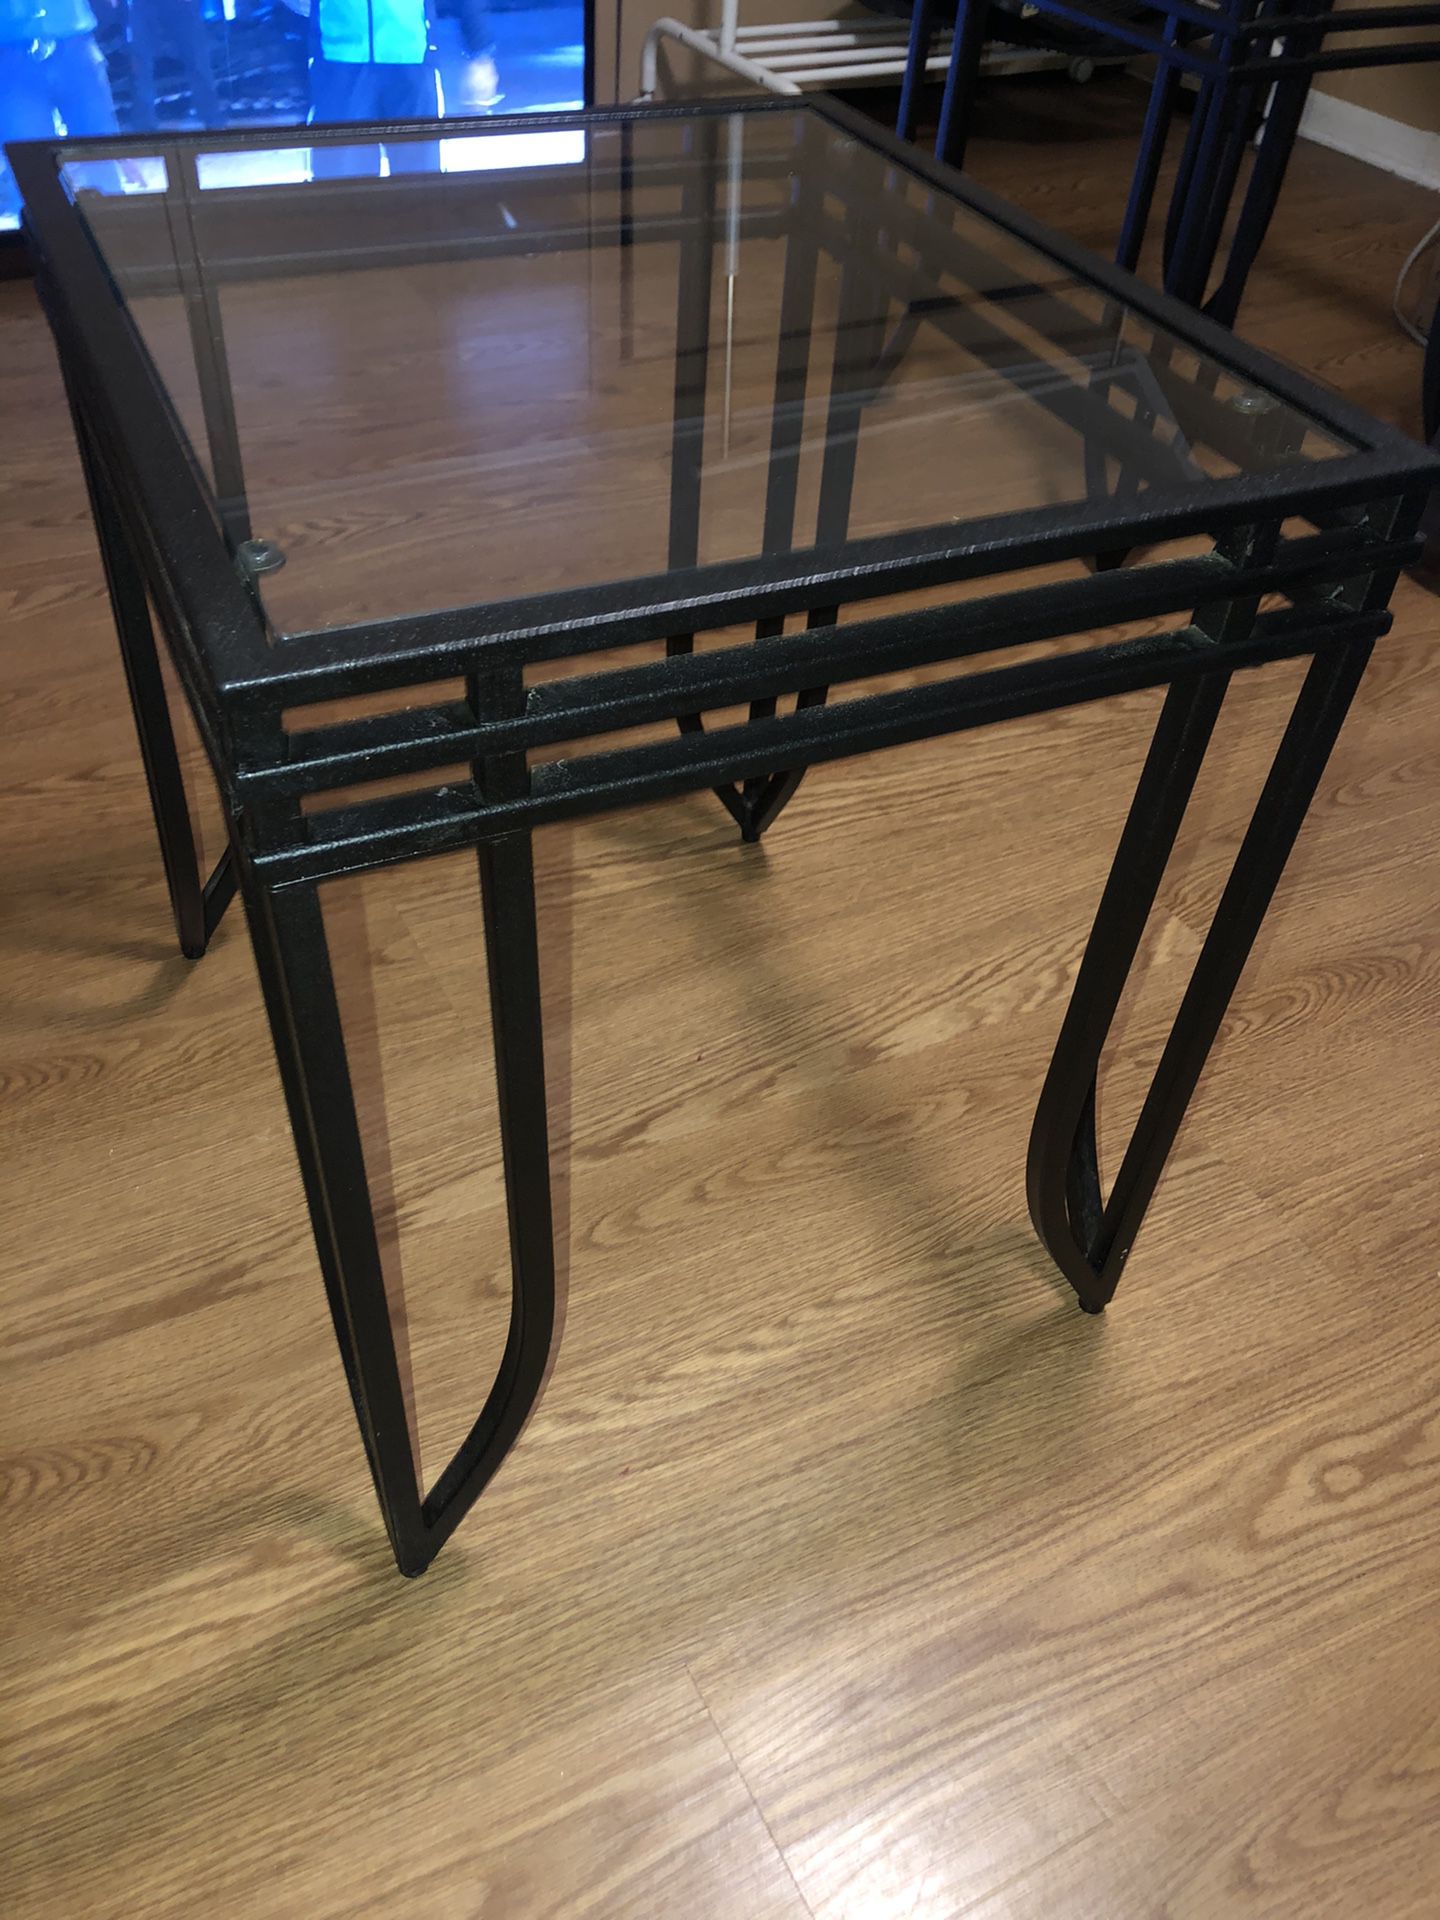 Two Black Metal Glass Stands